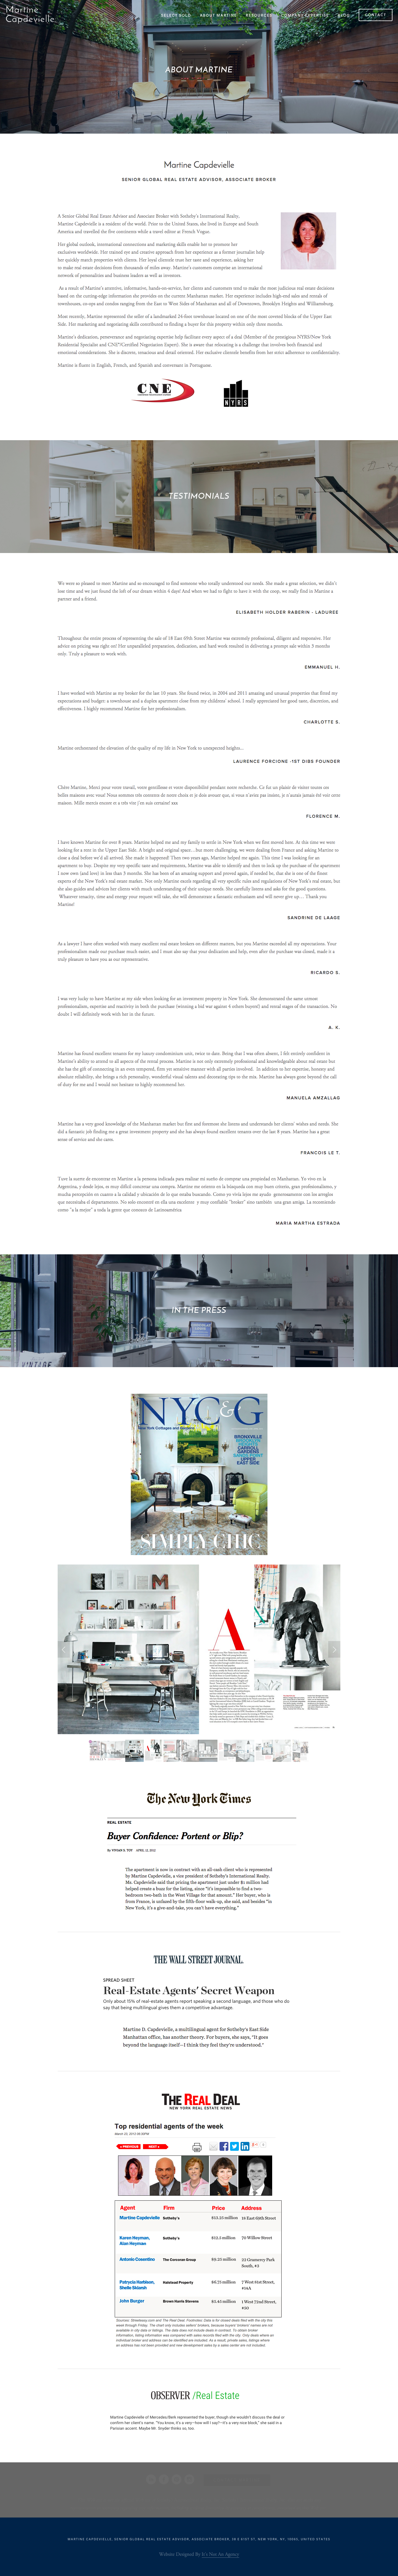 Real Estate Website_Martine Capdevielle2.png